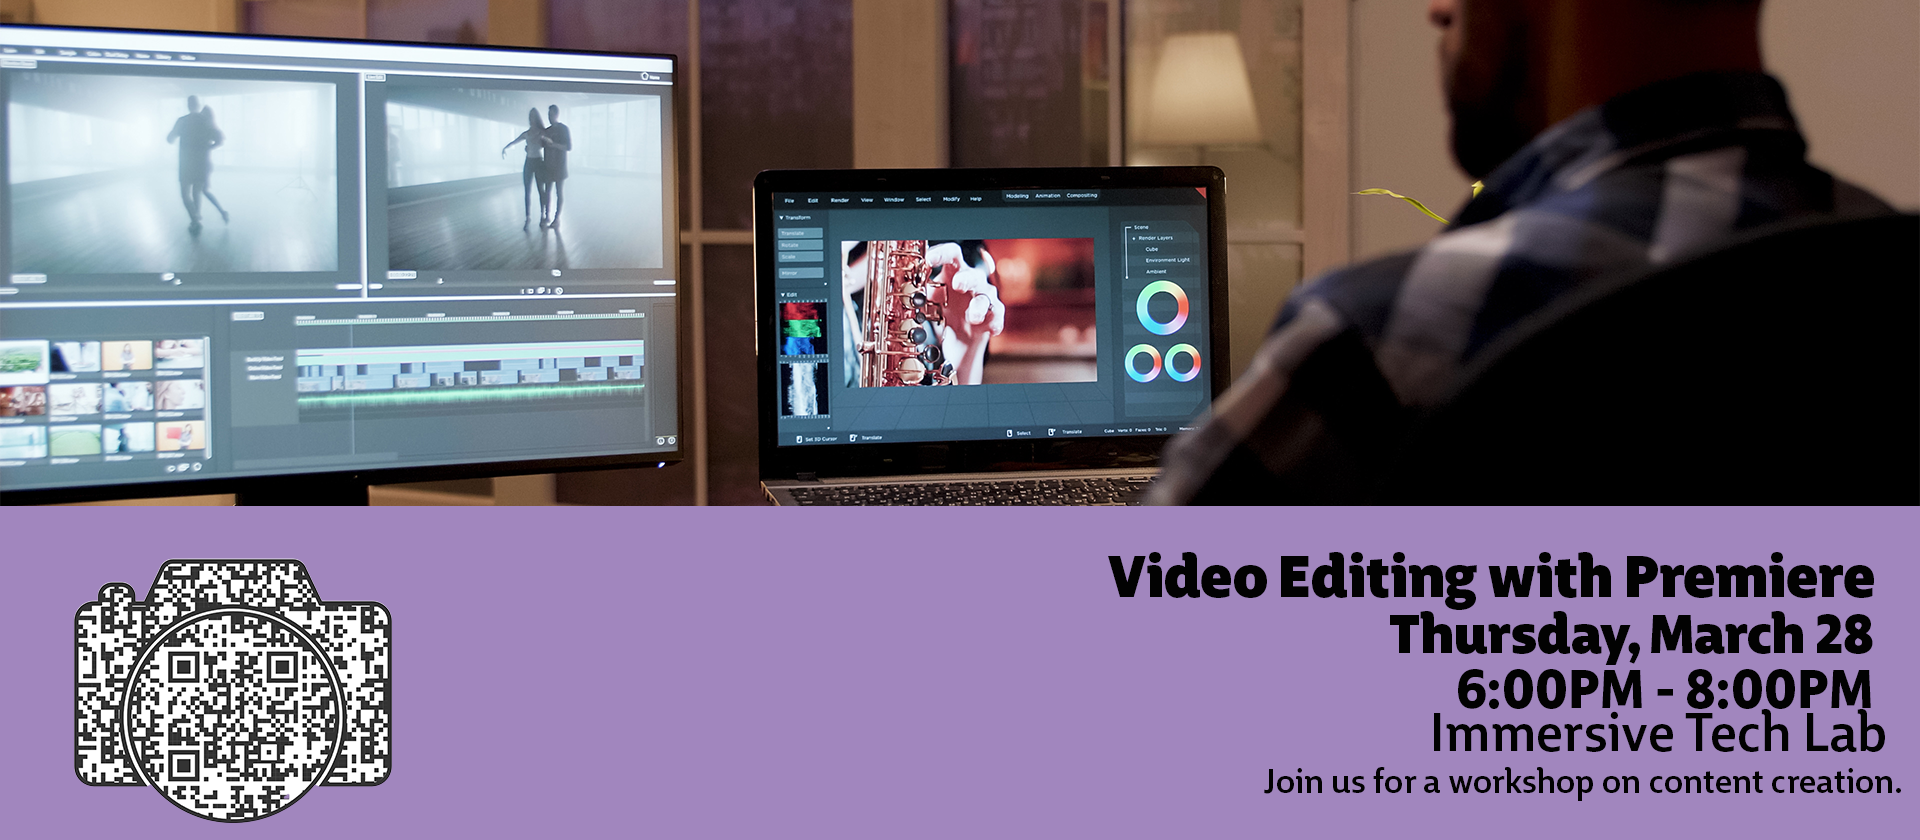 Video Editing with Premiere, Thursday March 28 6pm. Click or scan to register.